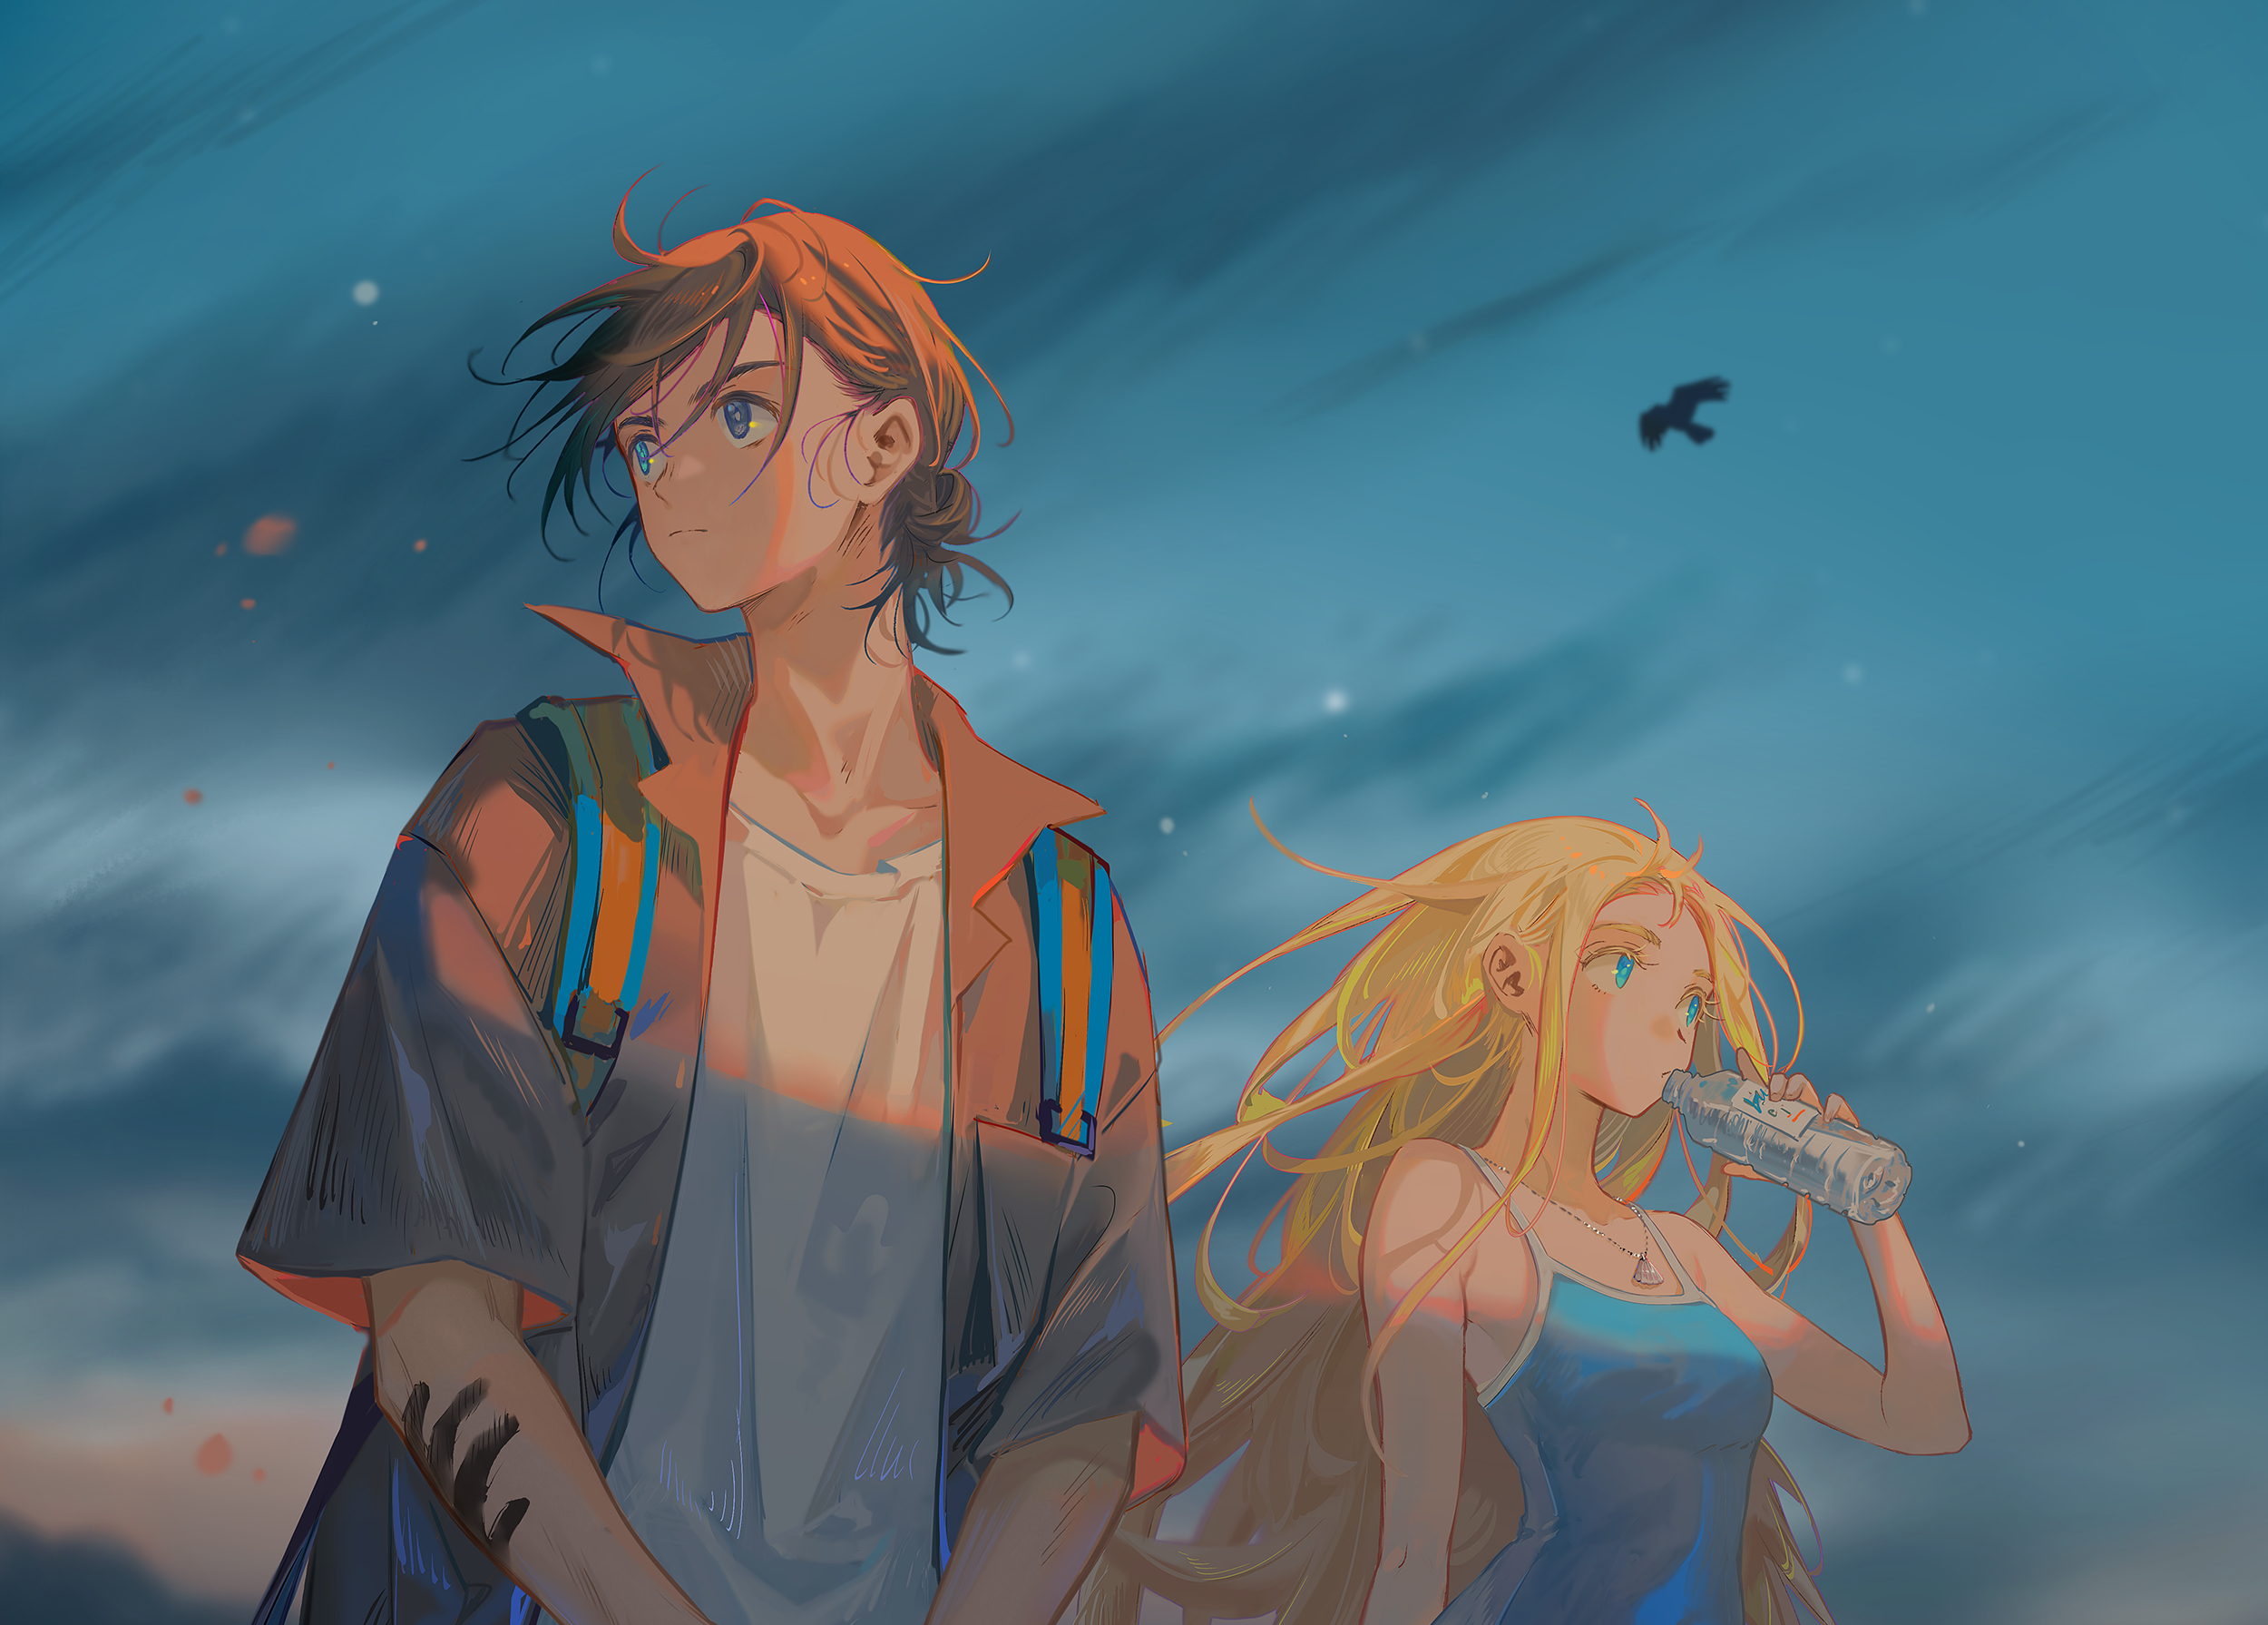 Amazon.co.jp: Composition Notebook: Summer Time Rendering anime fanart,  summertime render shinpei ajiro and ushio kofune Classic, Journal 6 x 9,  100 Page Blank Lined Paperback Journal/Notebook : Holmberg, Sigvard:  Foreign Language Books